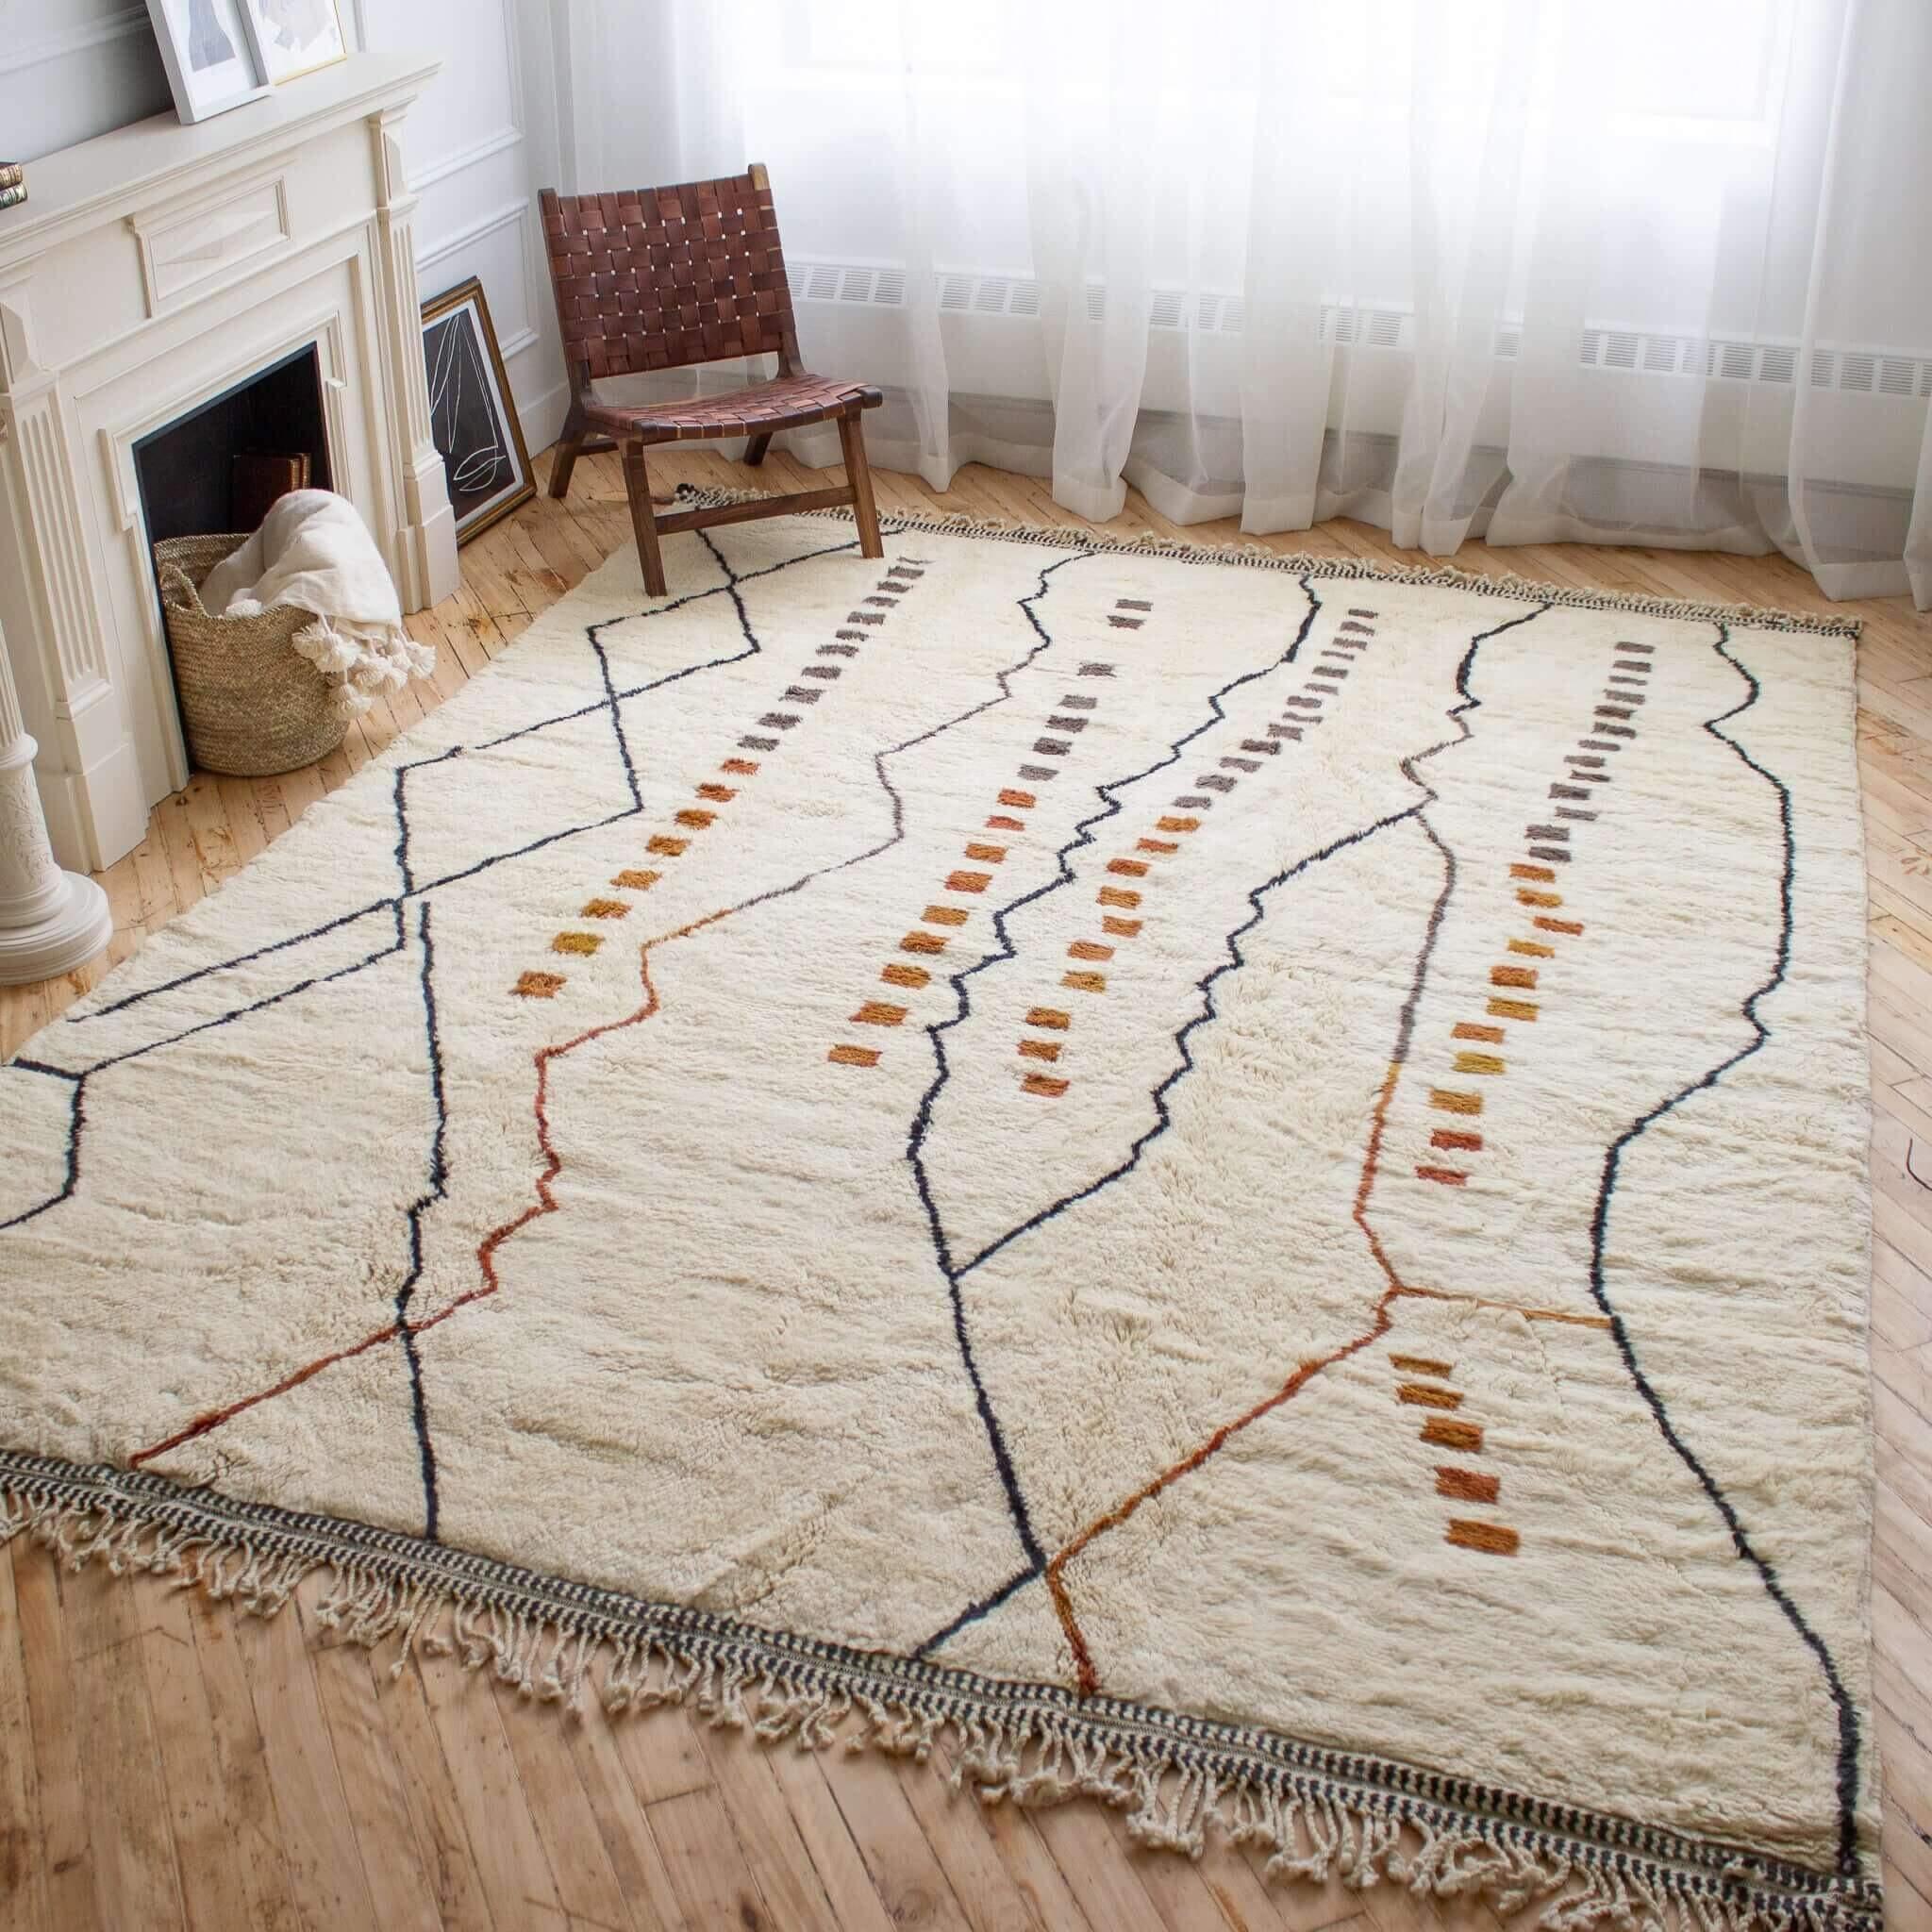 Why Beni Ourain rugs are the perfect addition to a minimalistic home? -  Berbers Market